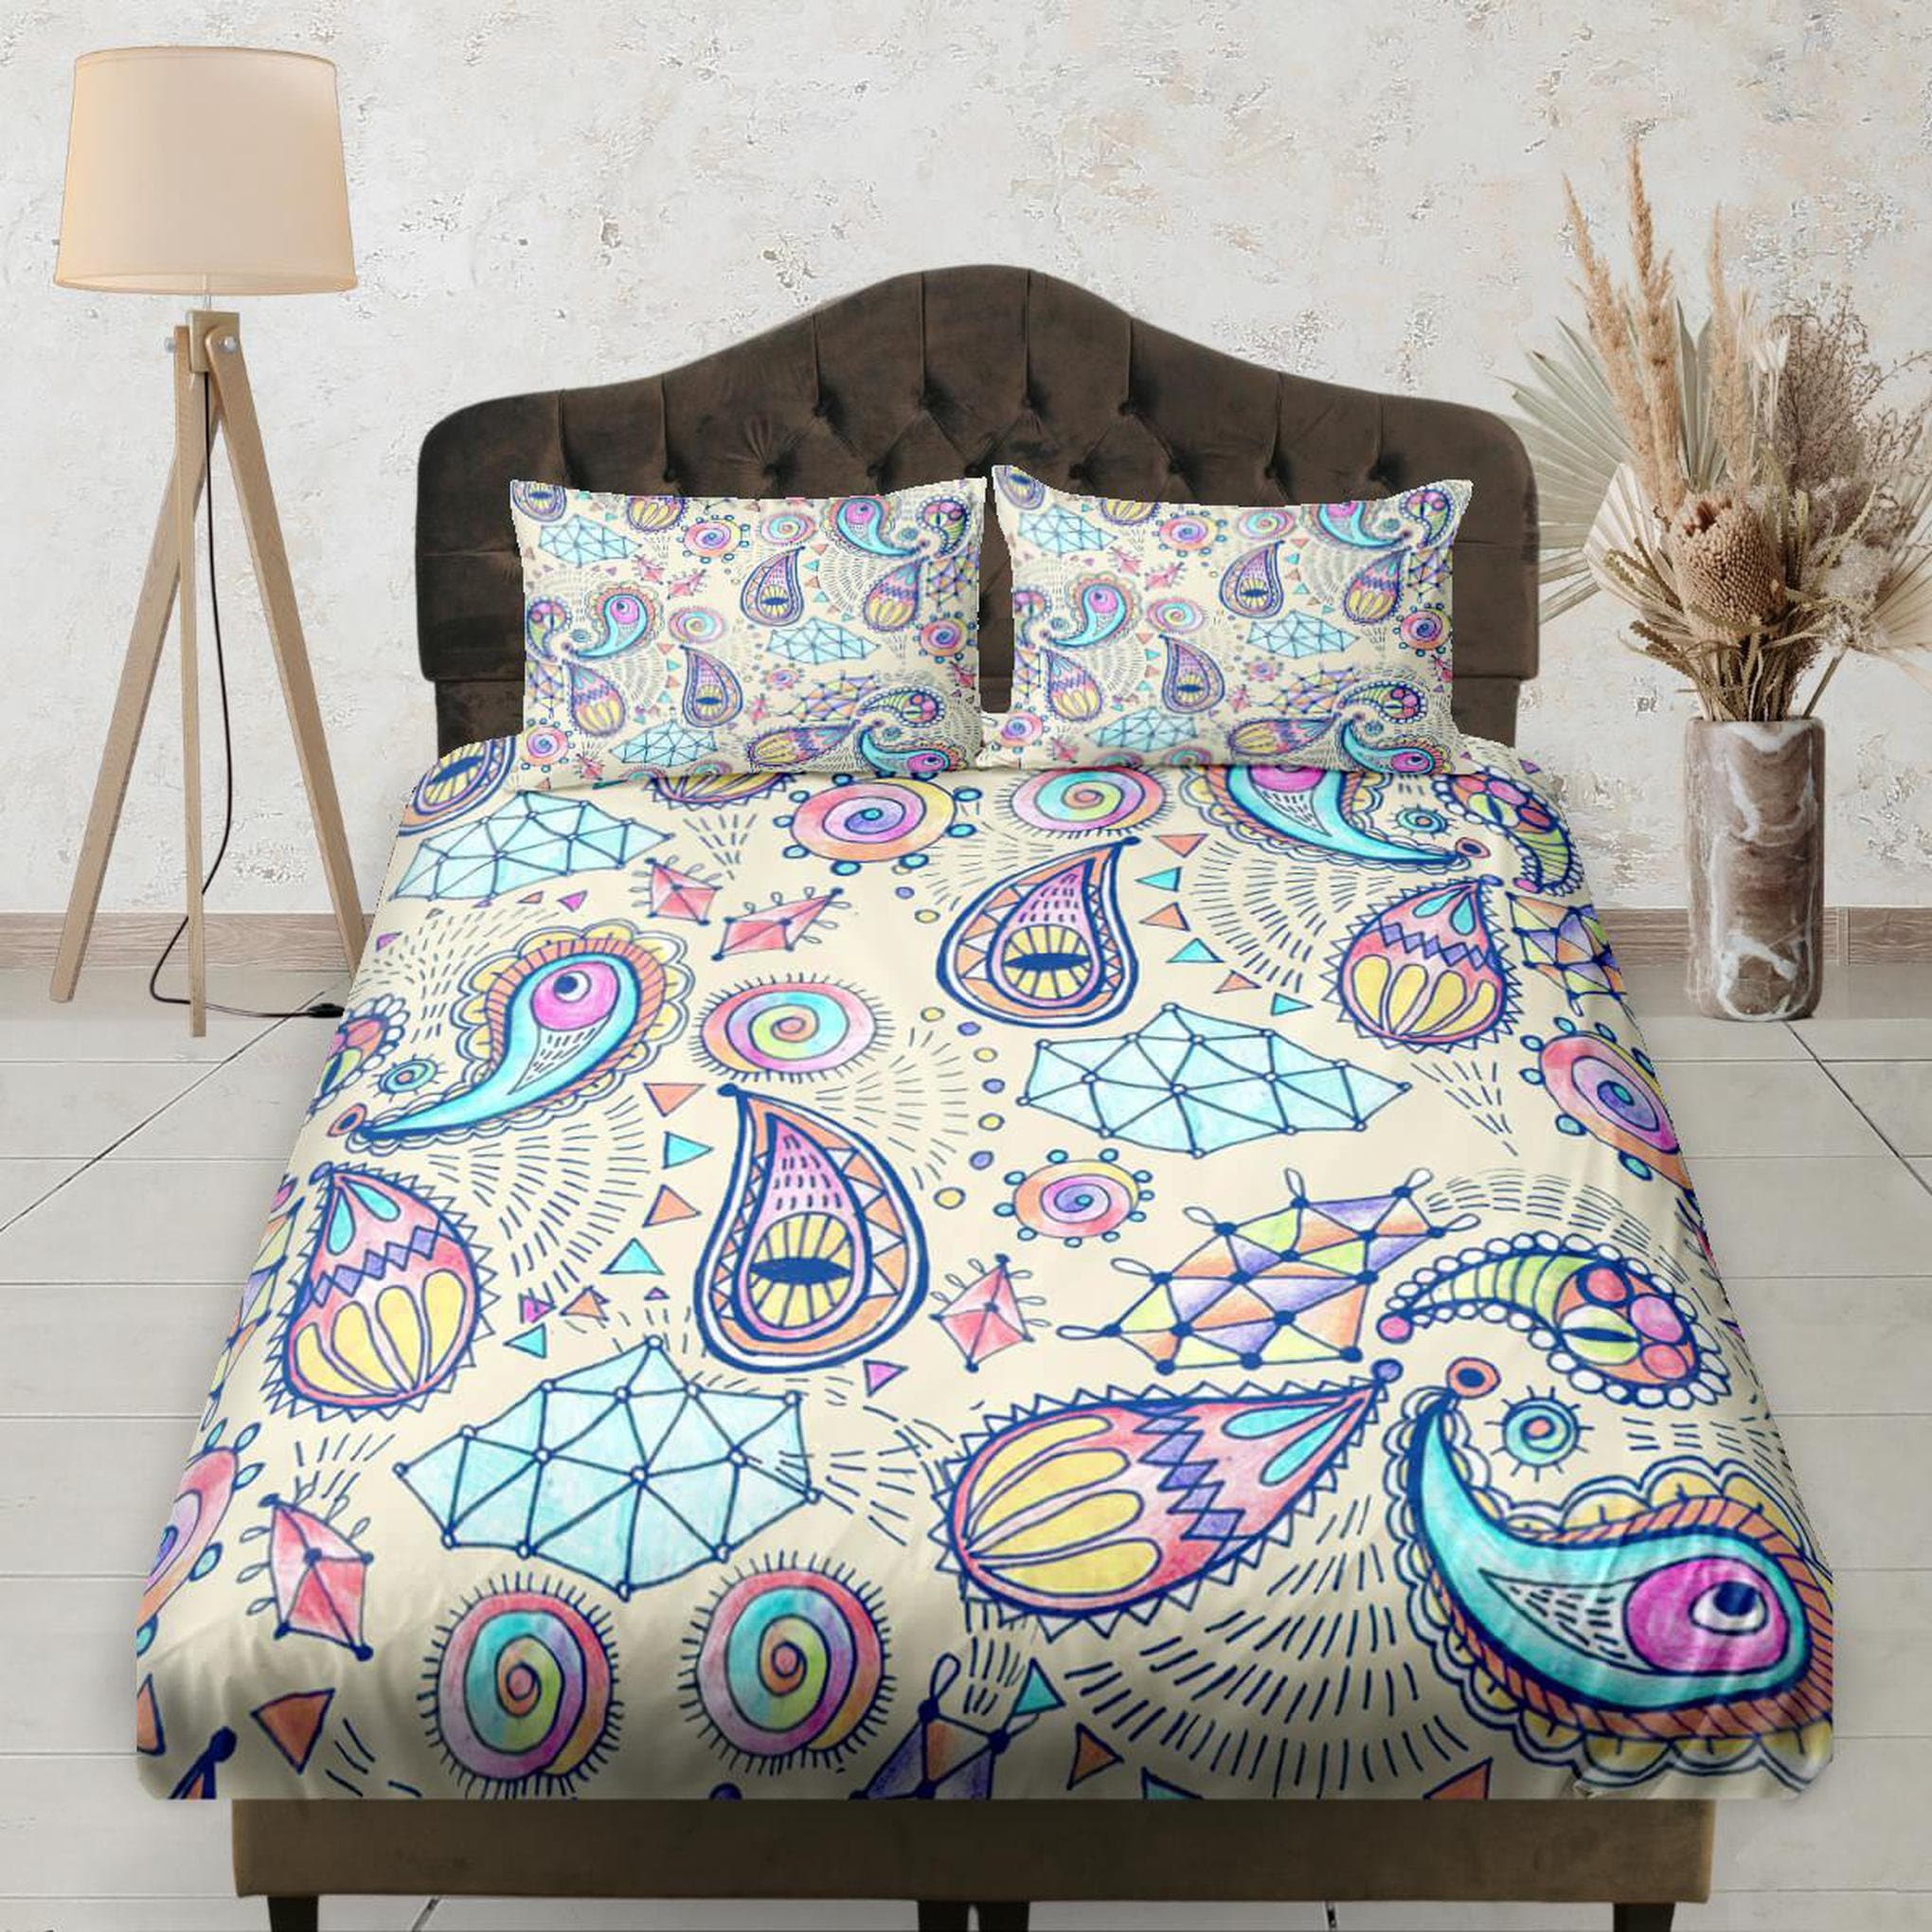 daintyduvet Colorful Paisley Fitted Sheet Deep Pocket, Aesthetic Bedding Set Full, Elastic Bedsheet, Dorm Bedding, Crib Sheet, Size King, Queen, Double